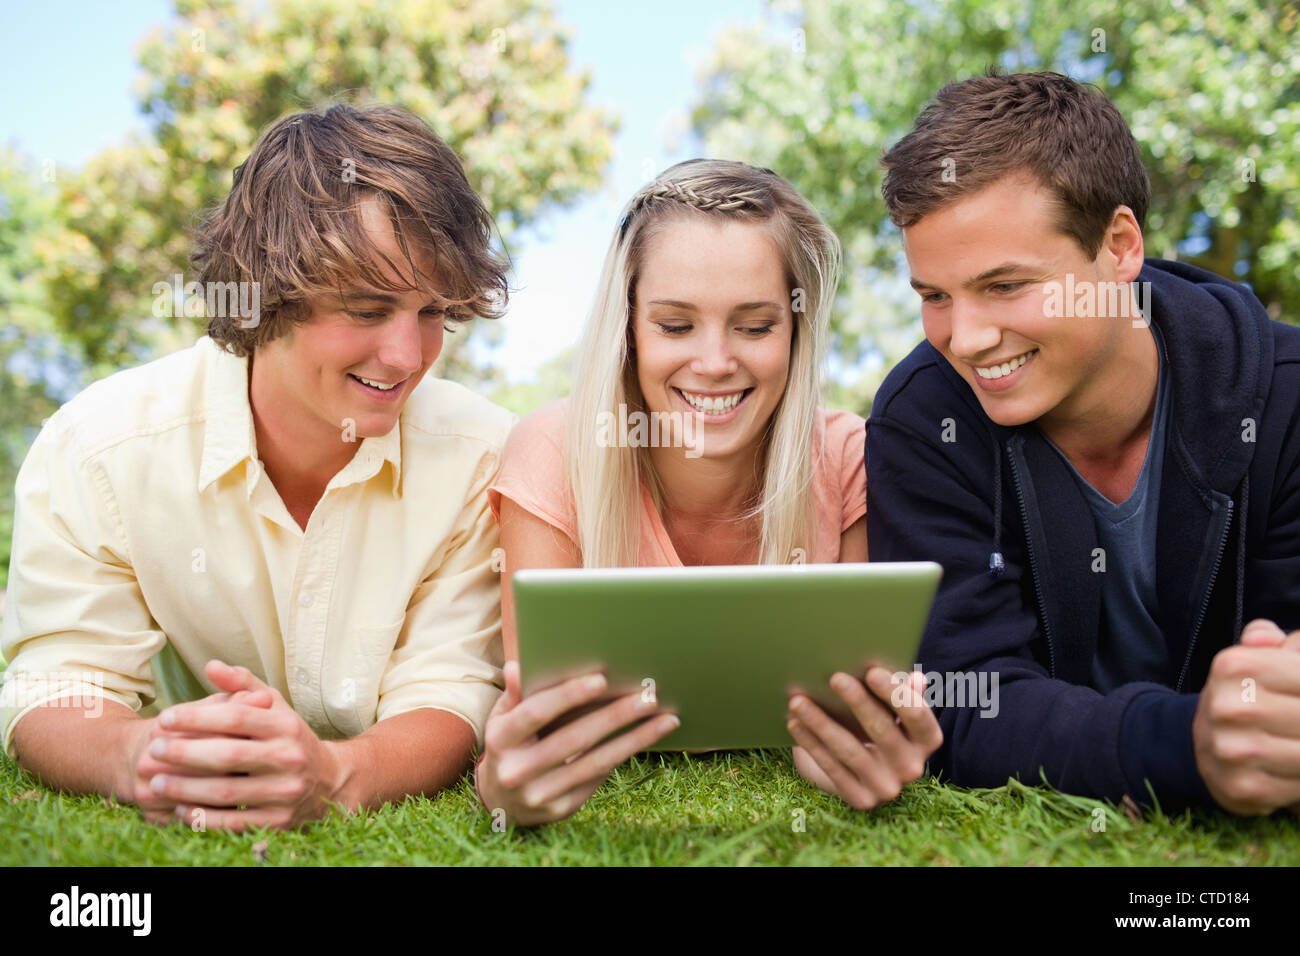 Three students using a tactile tablet Stock Photo